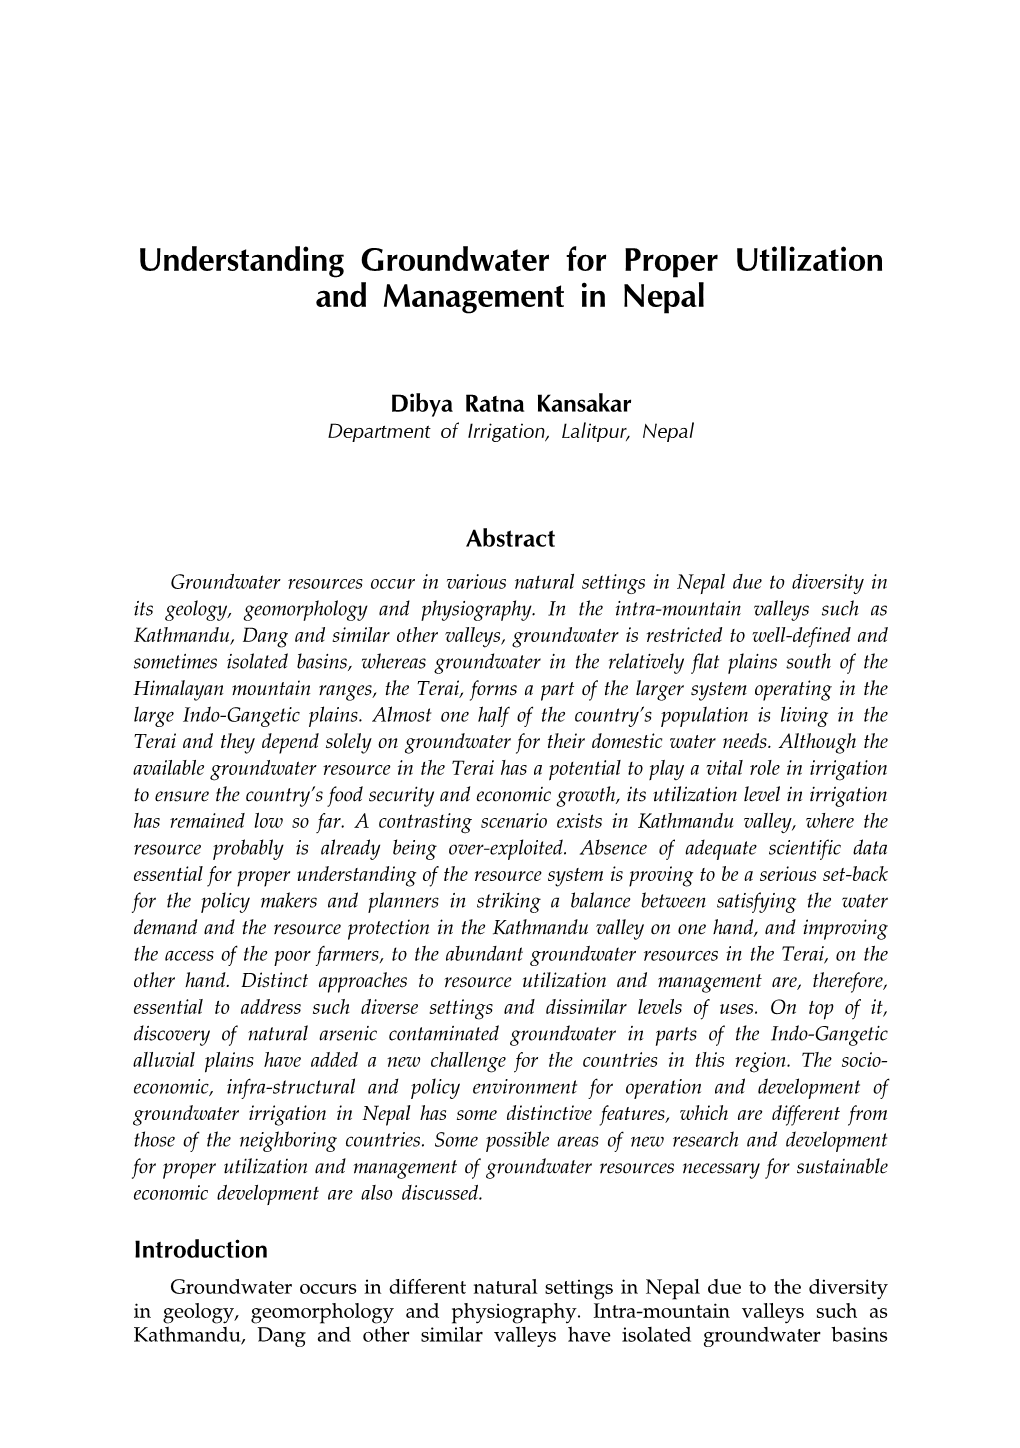 Understanding Groundwater for Proper Utilization and Management in Nepal